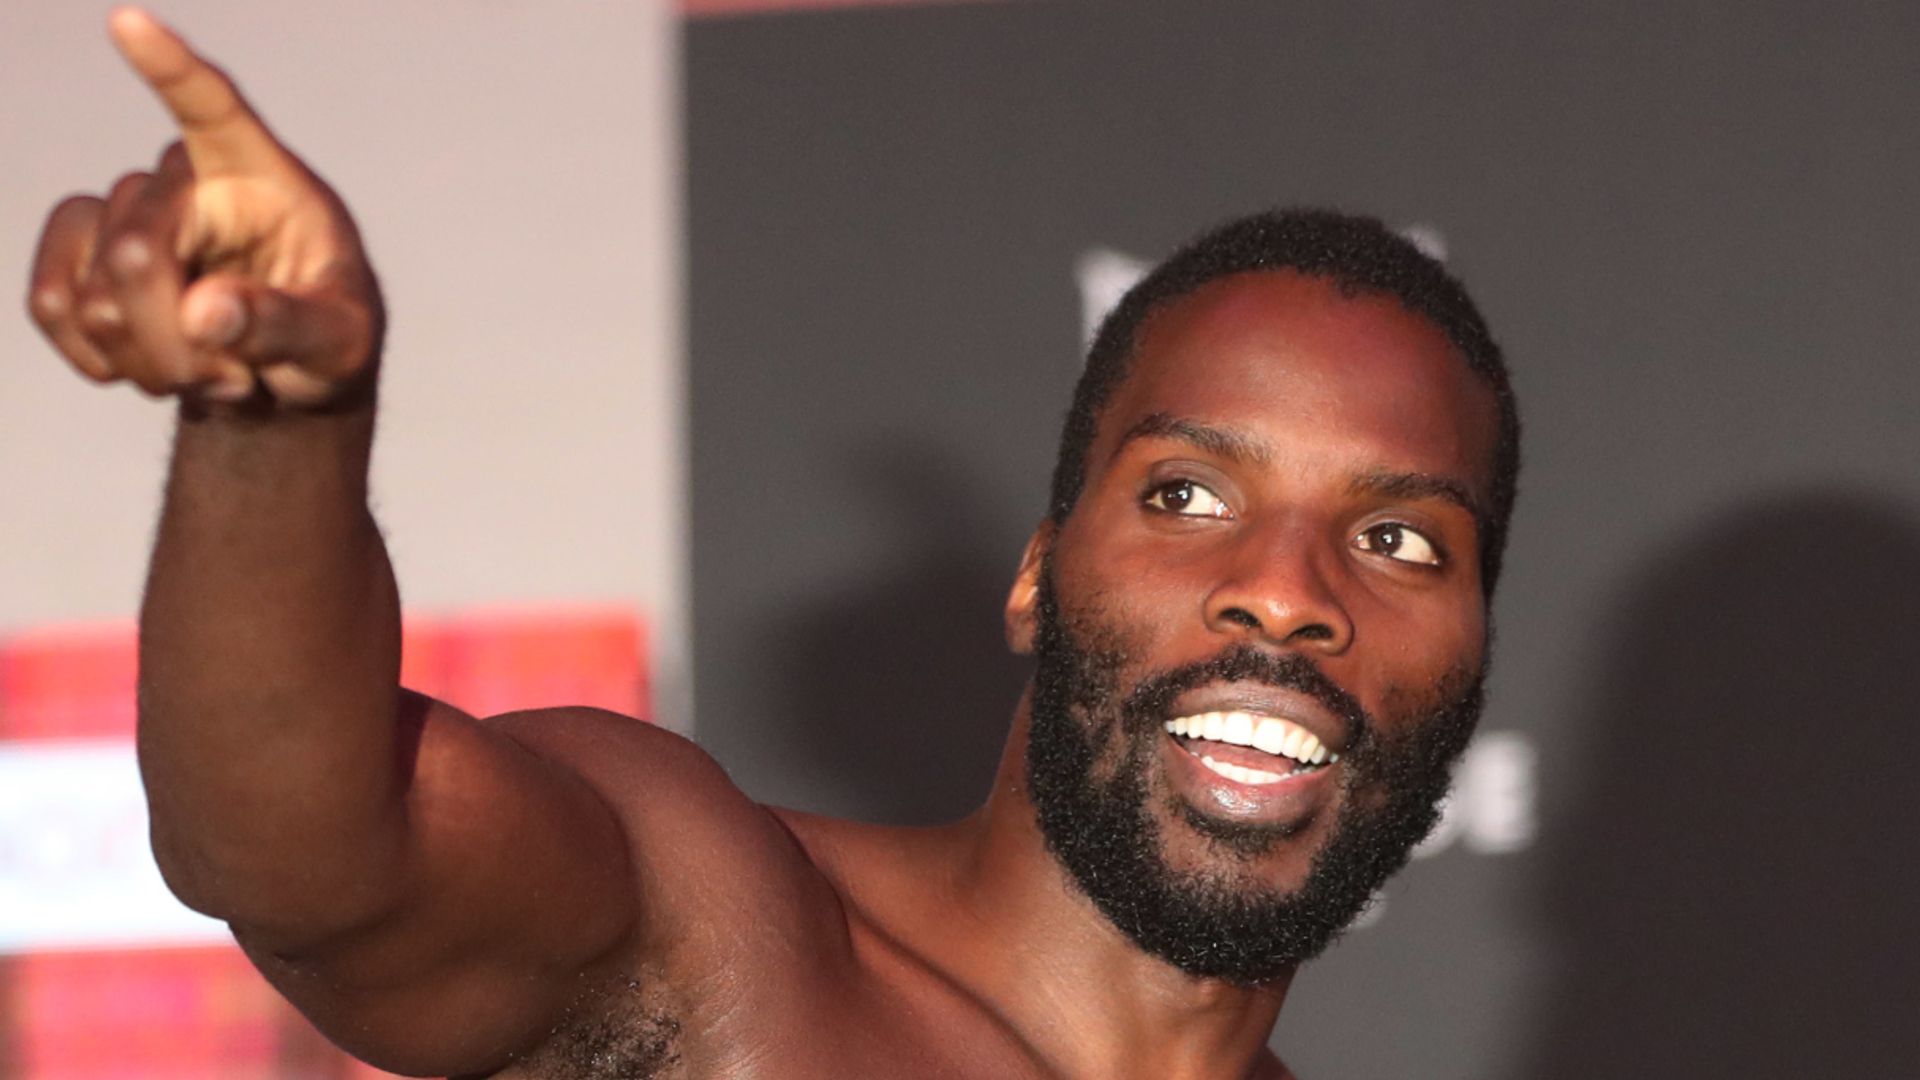 Okolie: If AJ said let’s make millions and fight, I wouldn't say no